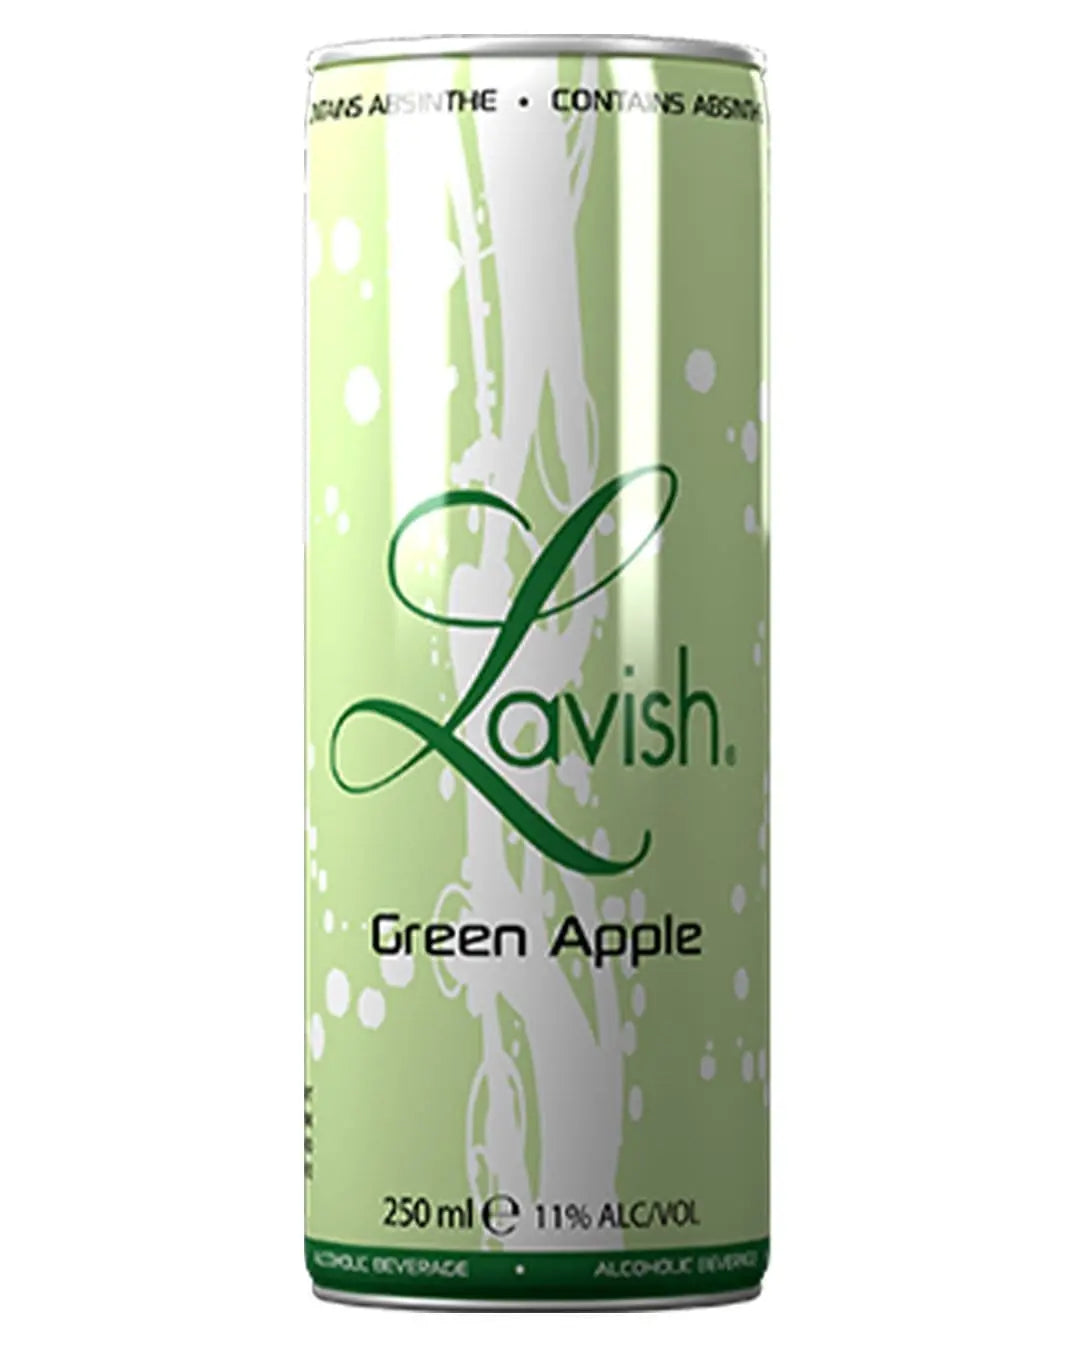 Lavish Green Apple & Absinthe Cocktail Can, 1 x 250 ml Ready Made Cocktails